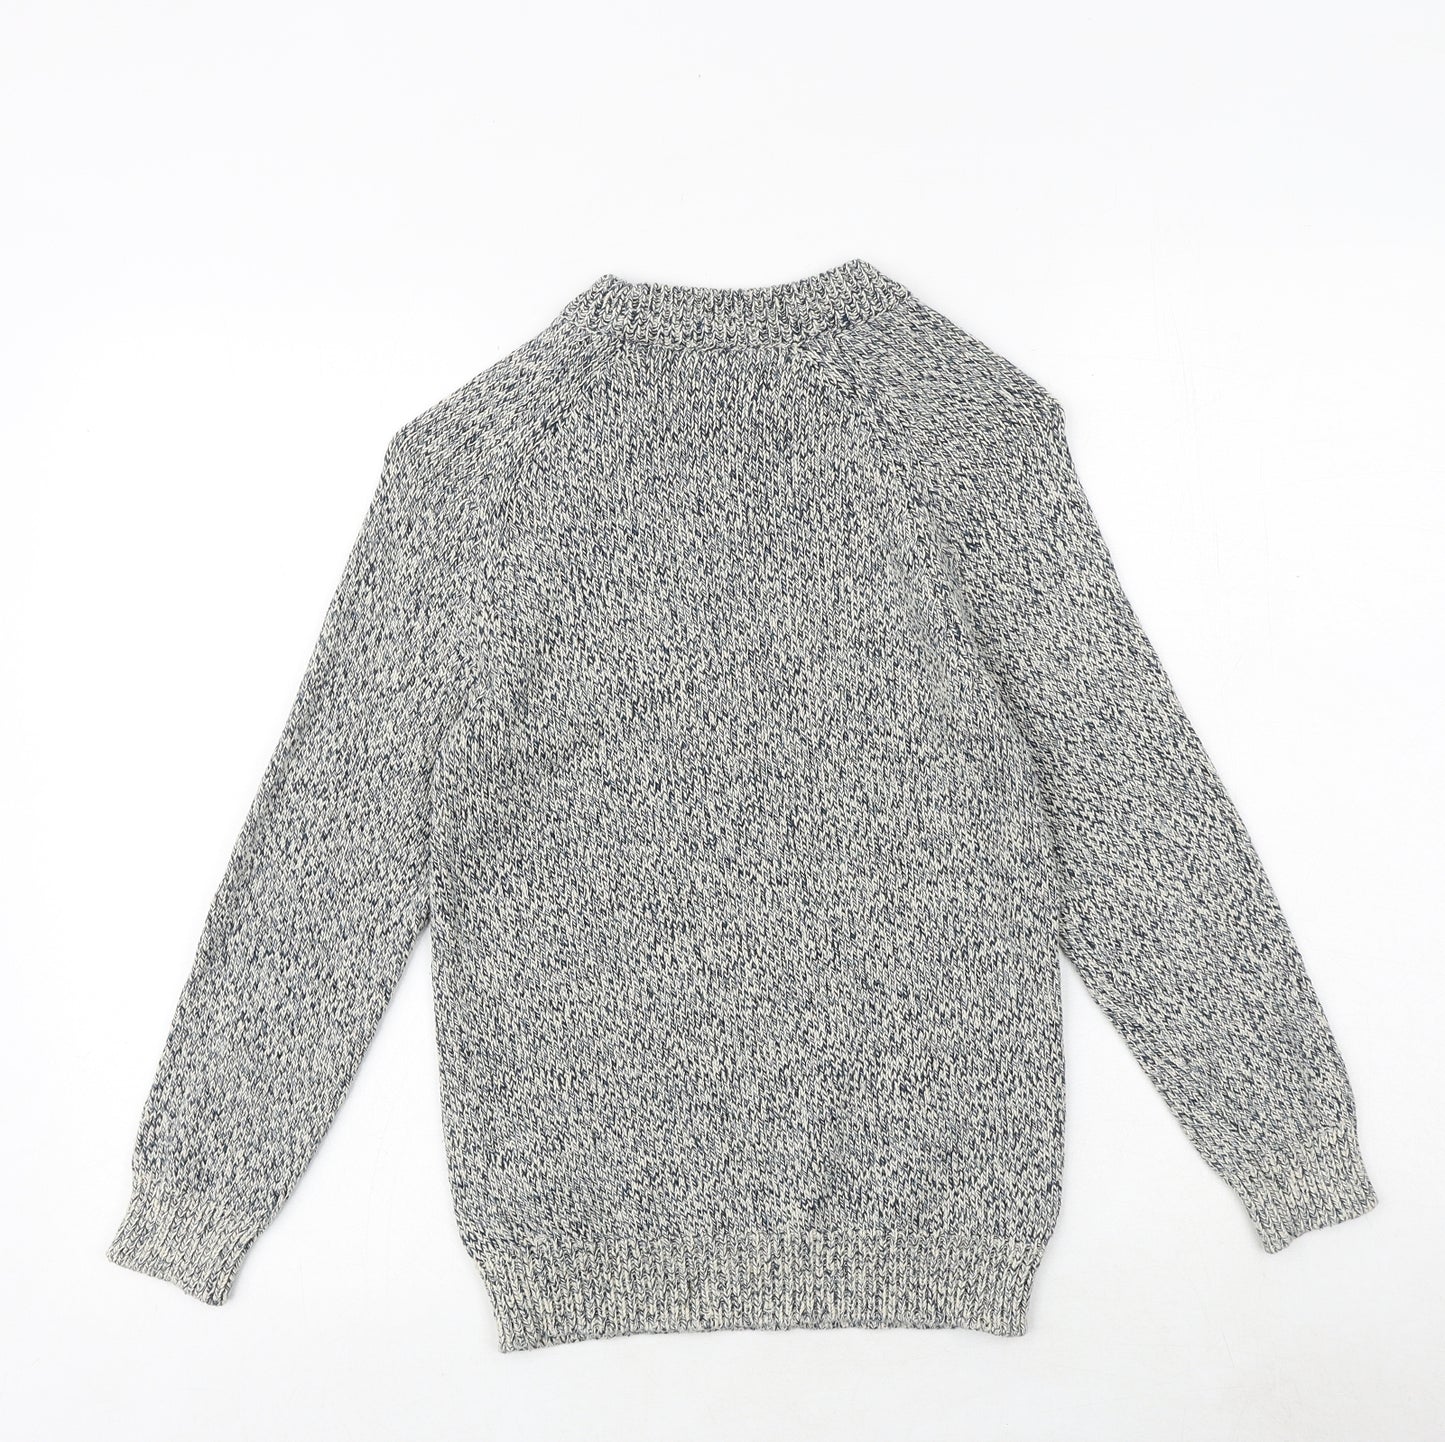 H&M Girls Grey Crew Neck 100% Cotton Pullover Jumper Size 9-10 Years Pullover